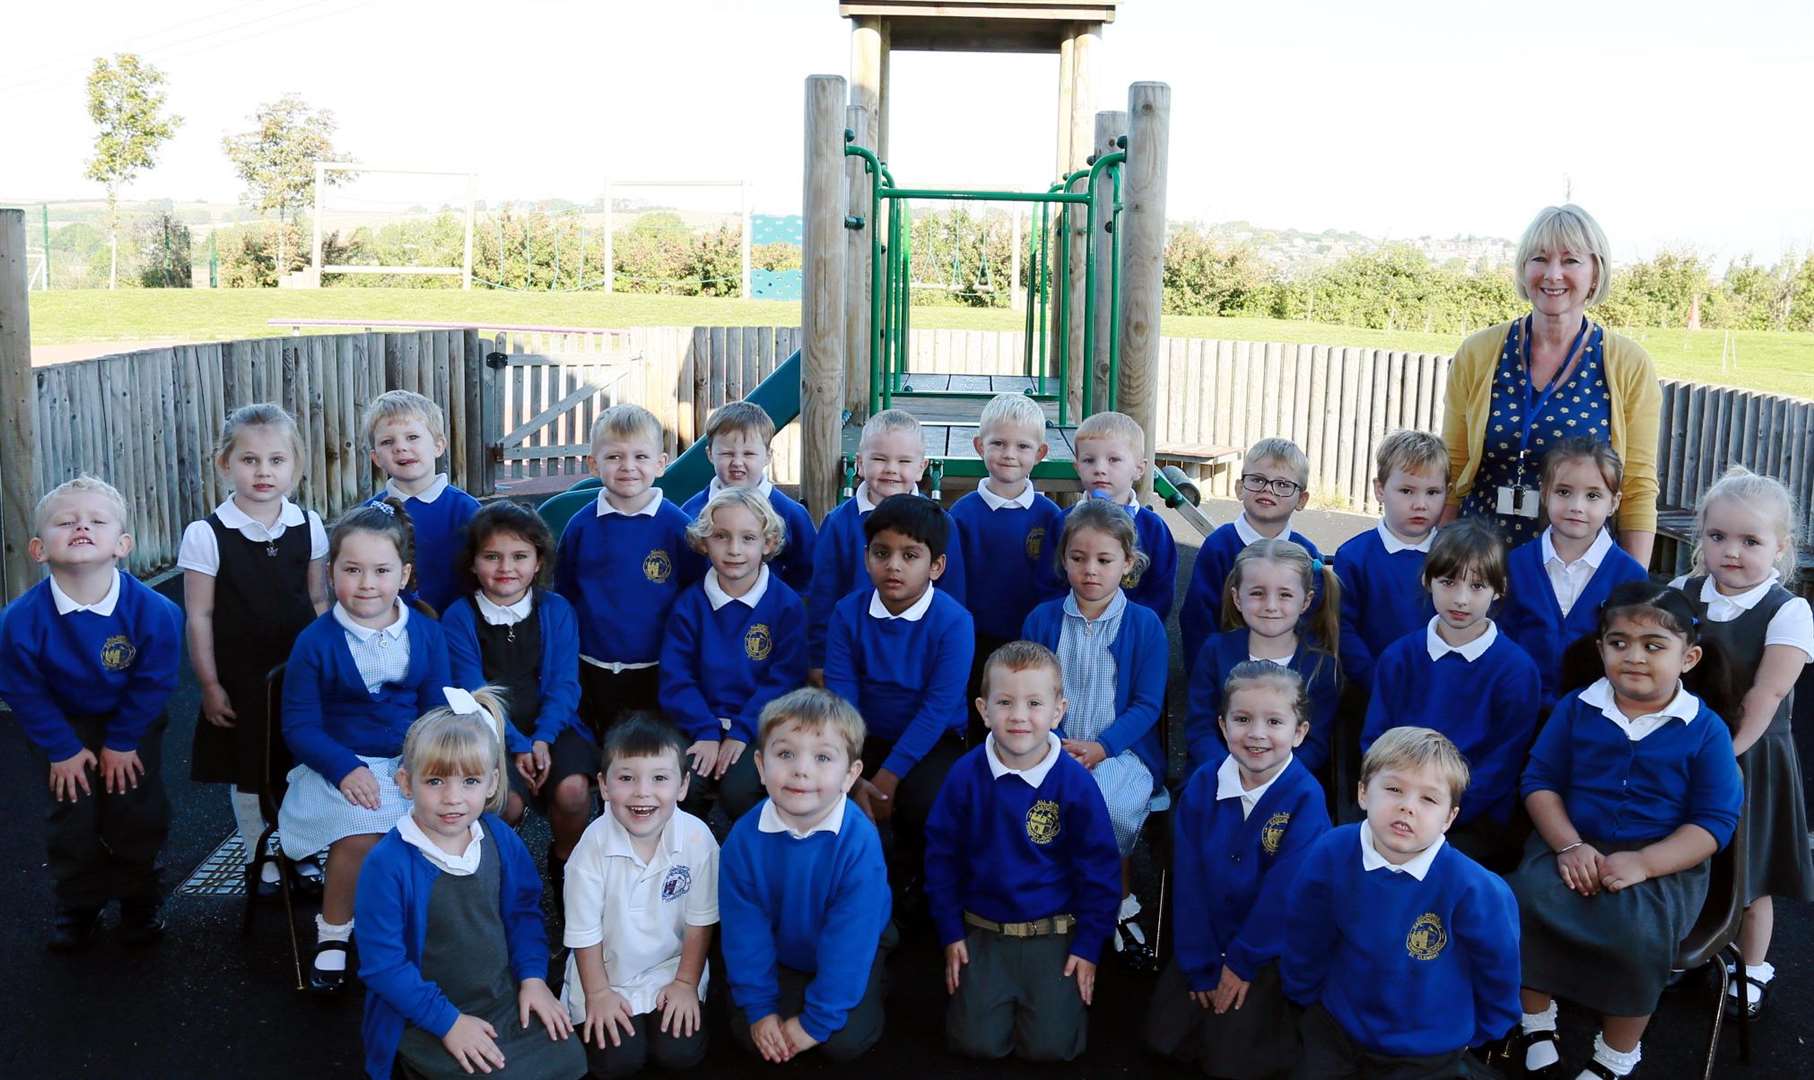 Pebbles class at Eastchurch Primary School, St Clements site. Picture: Phil Lee